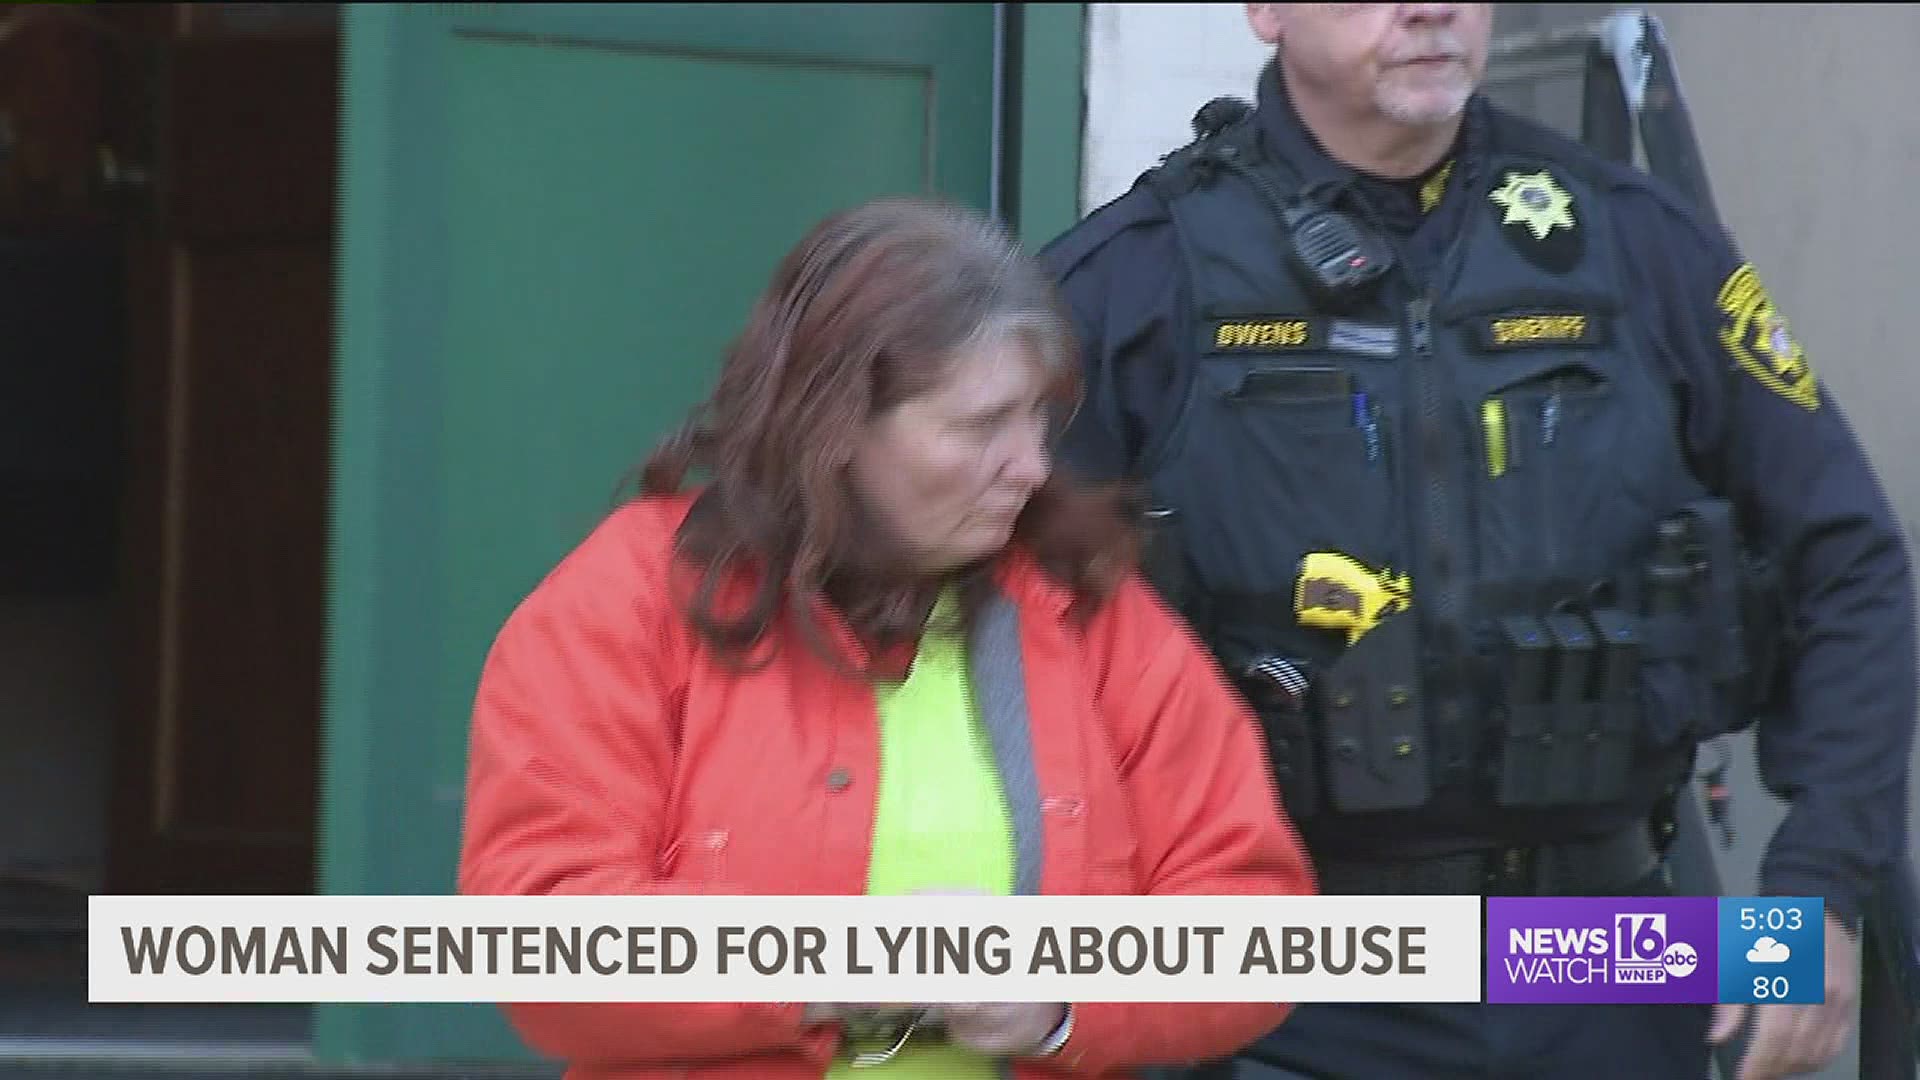 Christy Willis was sentenced Friday a few months after being found guilty of lying for her son to investigators about his fatal abuse of a young girl.